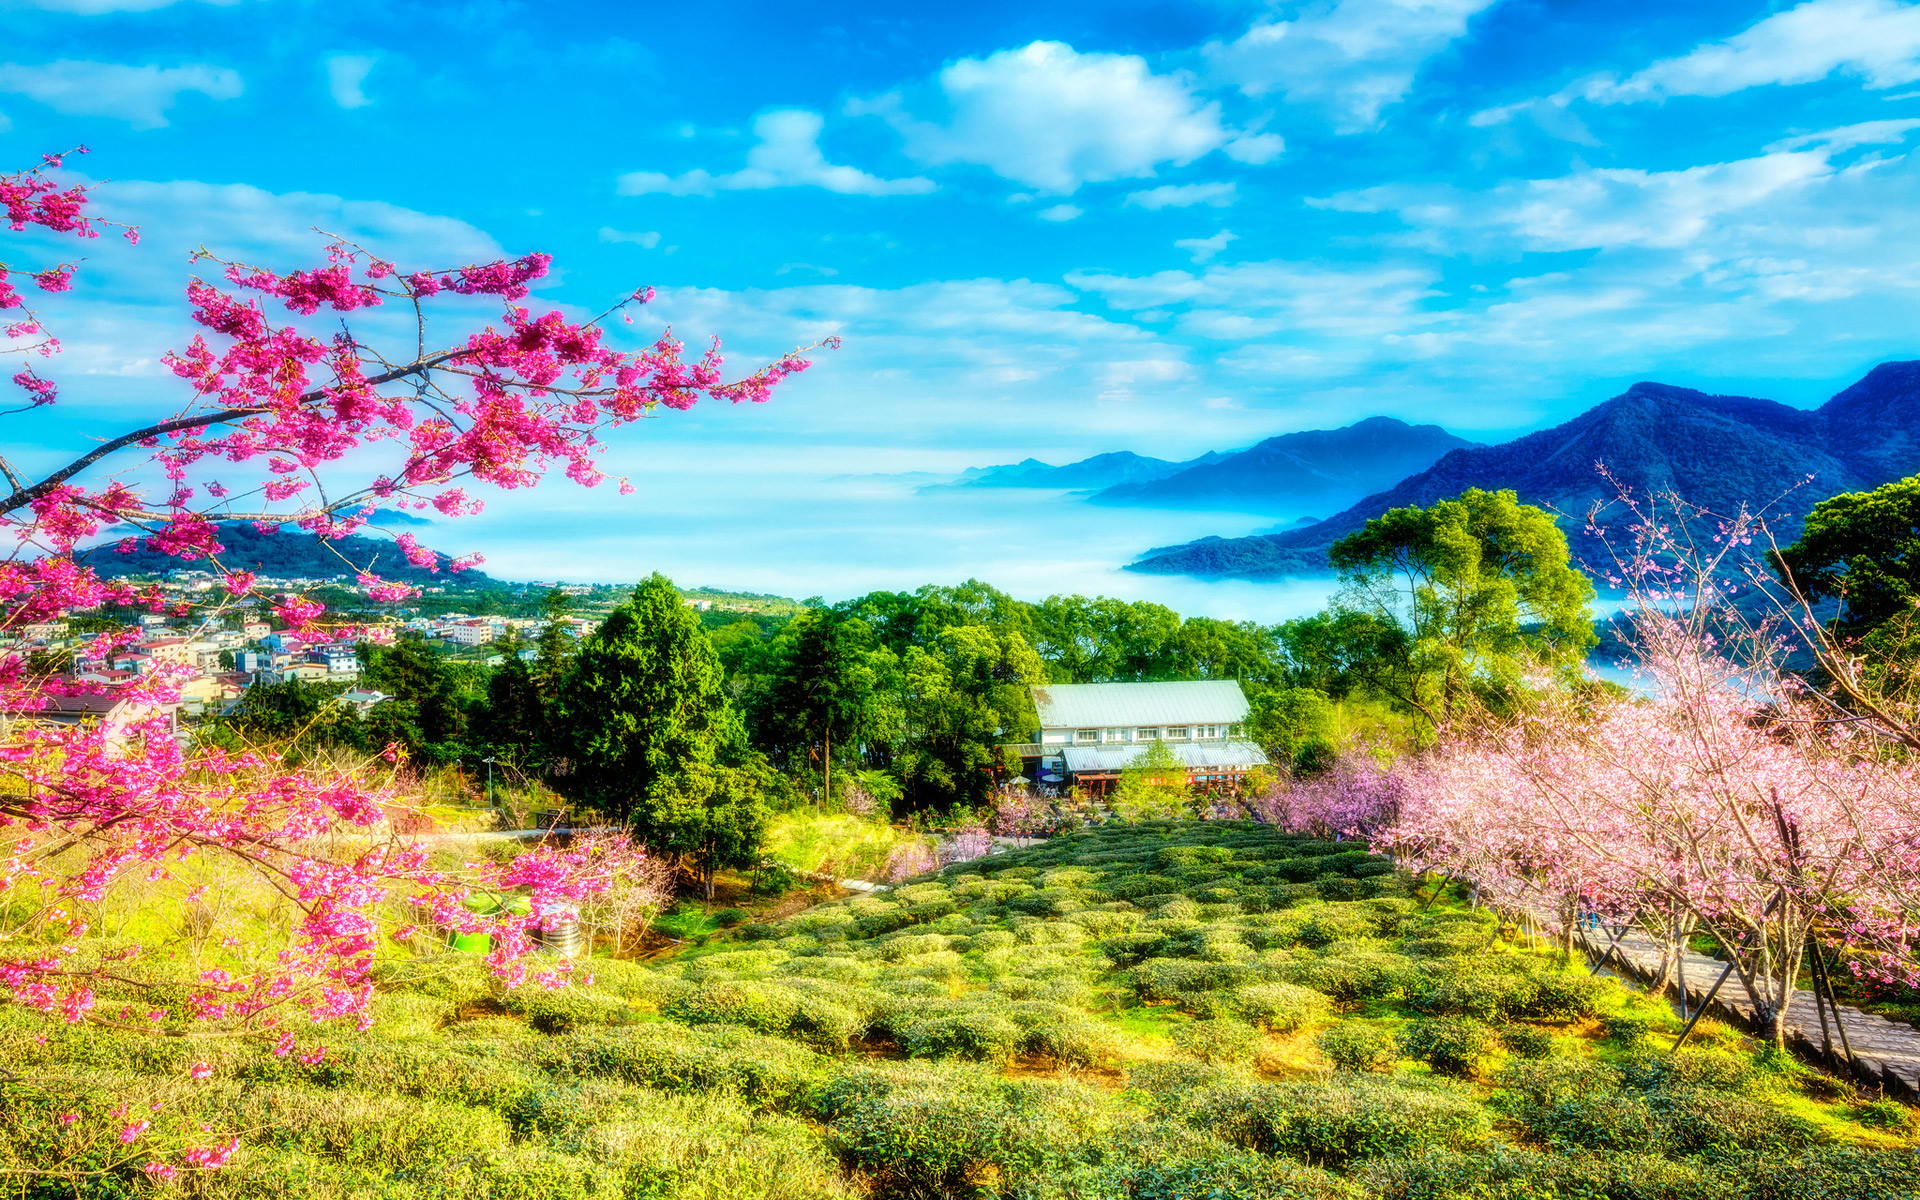 48 Chinese Scenery Wallpaper On, Beautiful Chinese Landscape Wallpapers